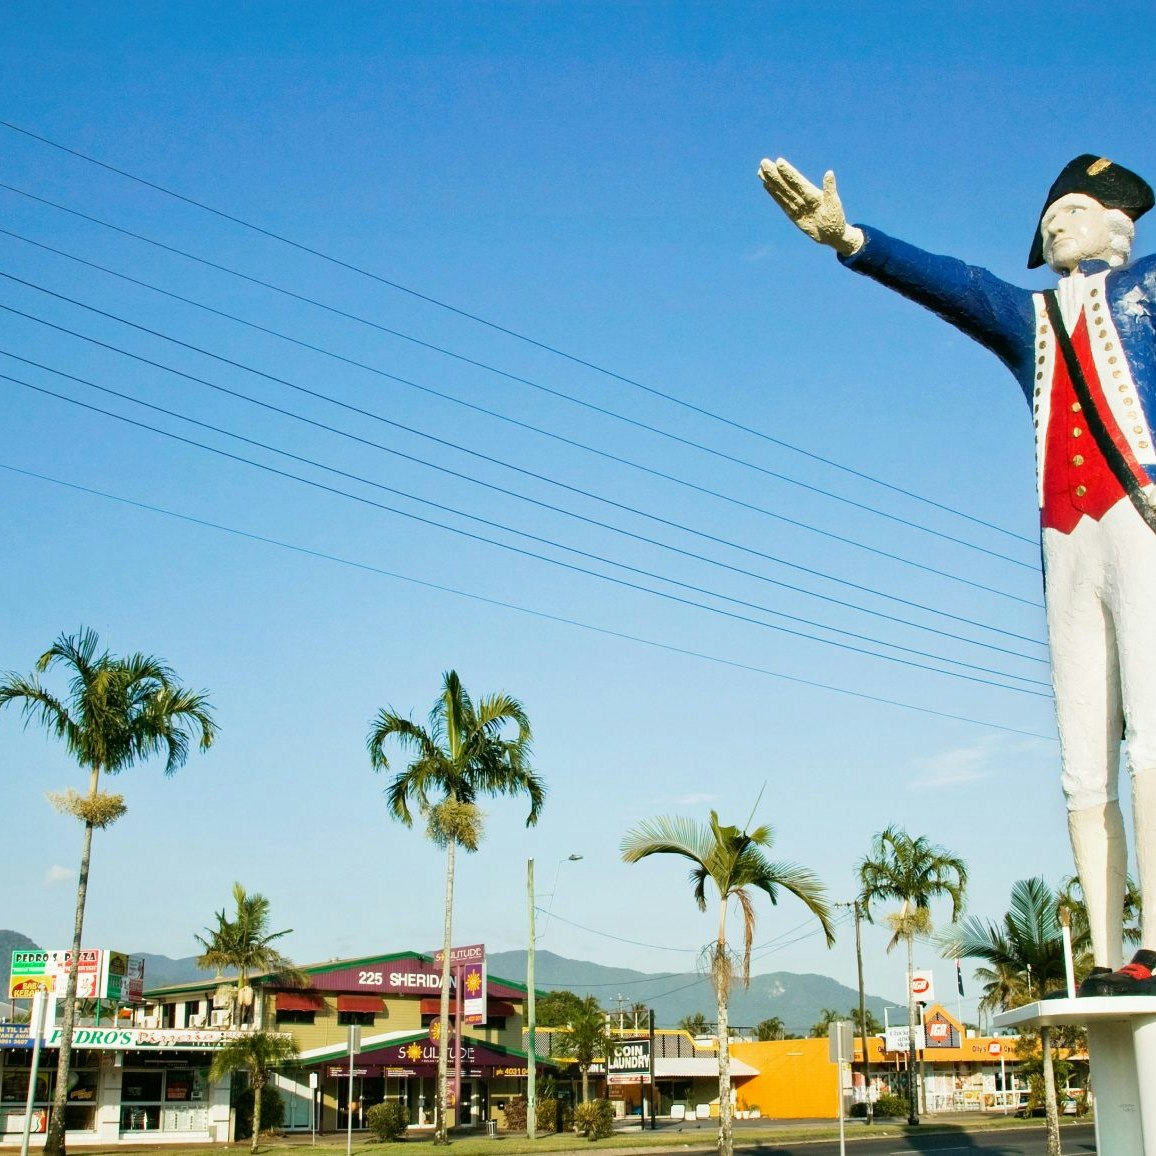 AUSTRALIA-Queensland-NORTH COAST-Cairns: Captain Cook Statue on Captain Cook Highway / Morning